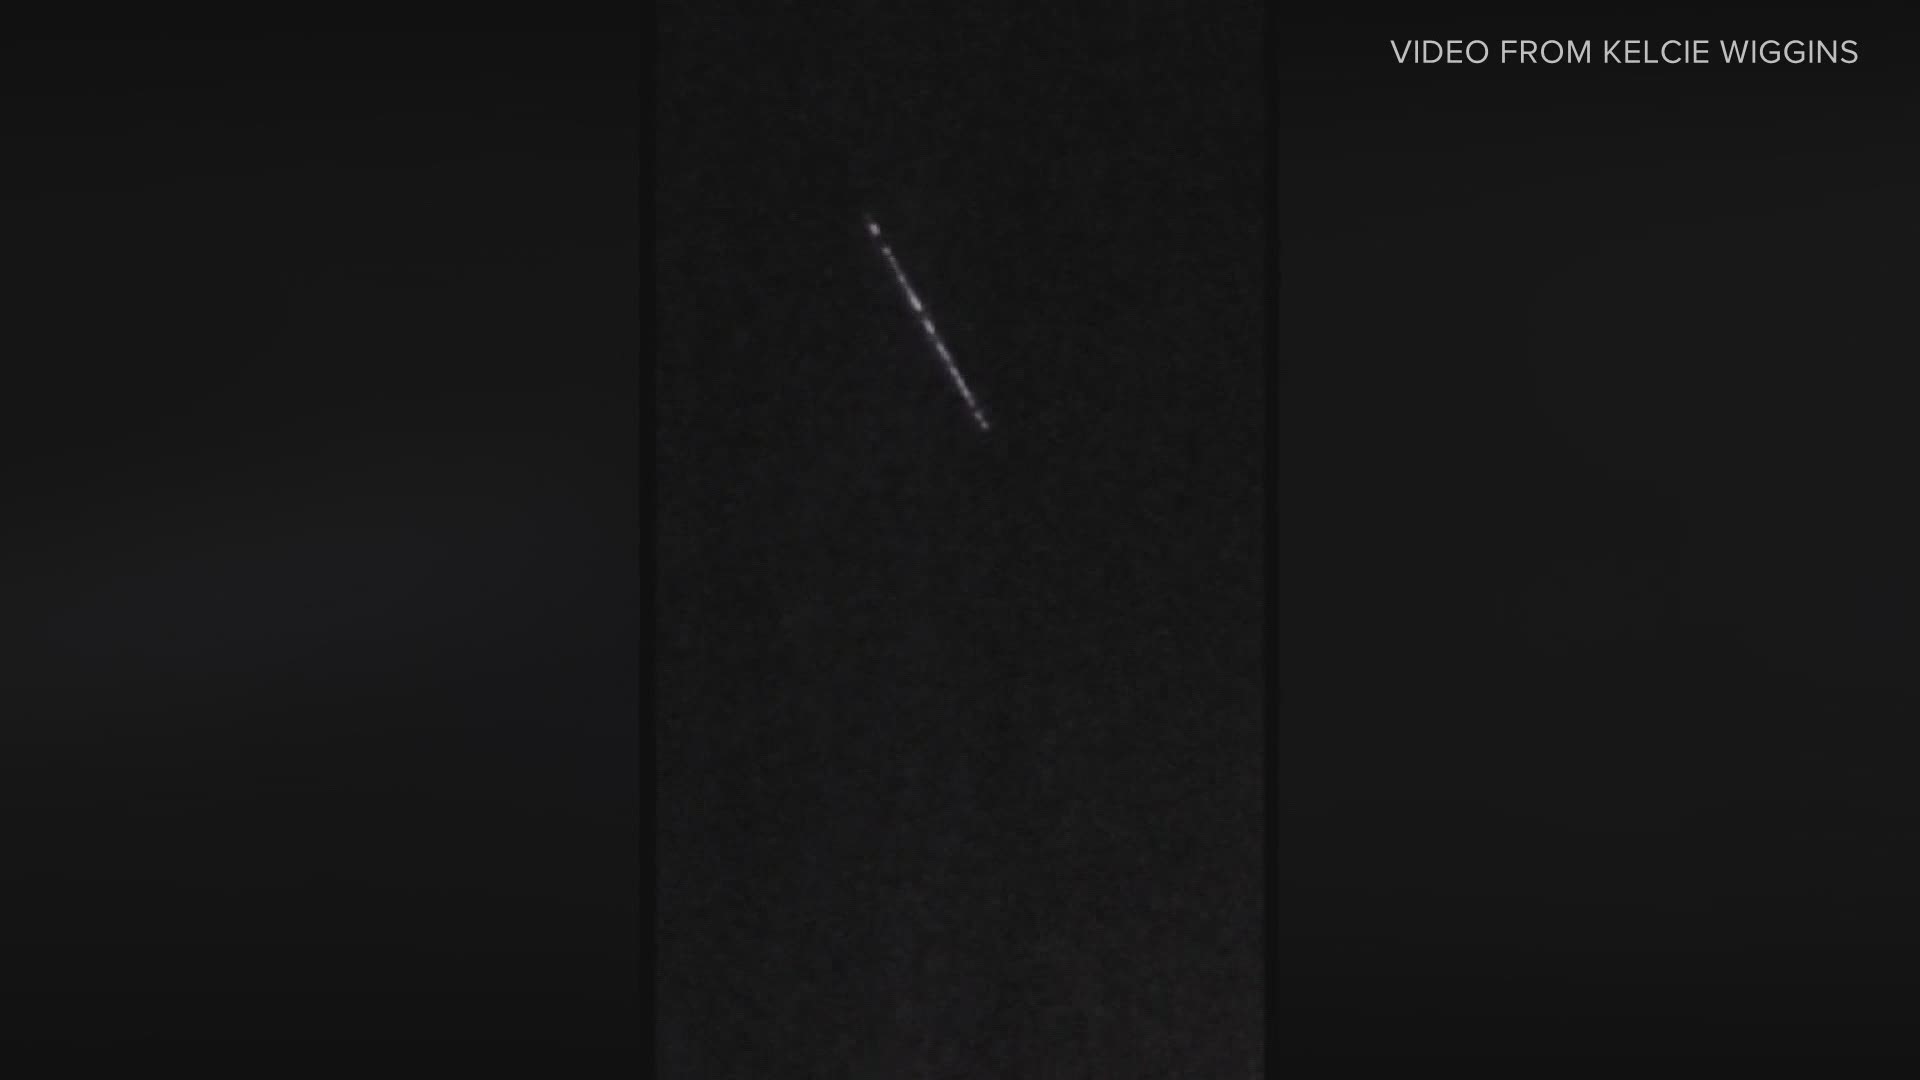 Dr. James Davenport, a professor at the University of Washington, says the lights seen in the sky over western Washington Tuesday were Starlink satellites.